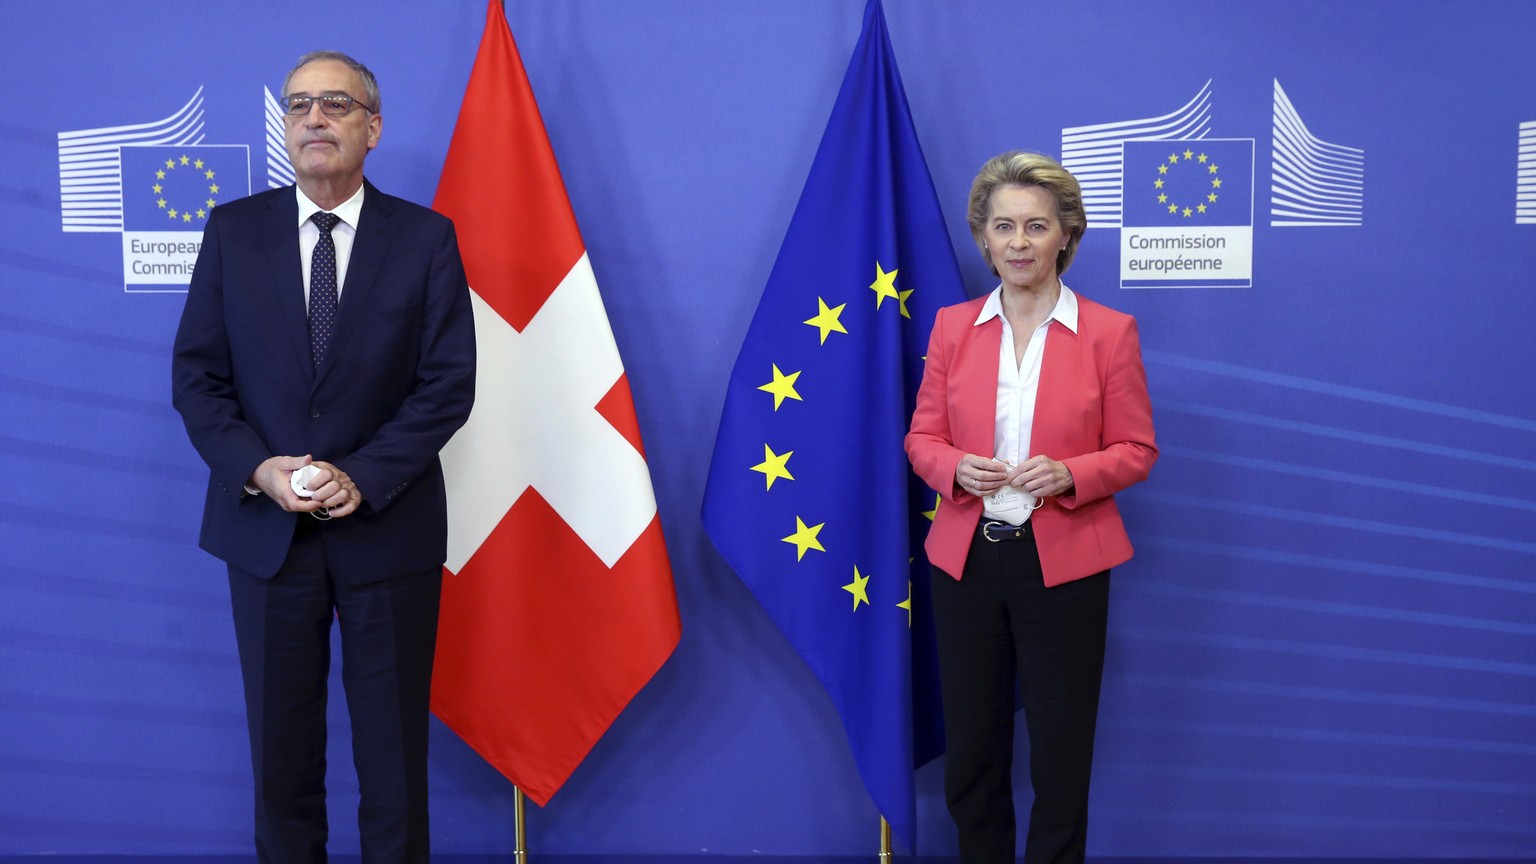 European Commission President Ursula Von der Leyen, right, greets Swiss President Guy Parmelin prior to a meeting at EU headquarters in Brussels, Friday, April 23, 2021. (Francois Walschaerts, Pool vi ...